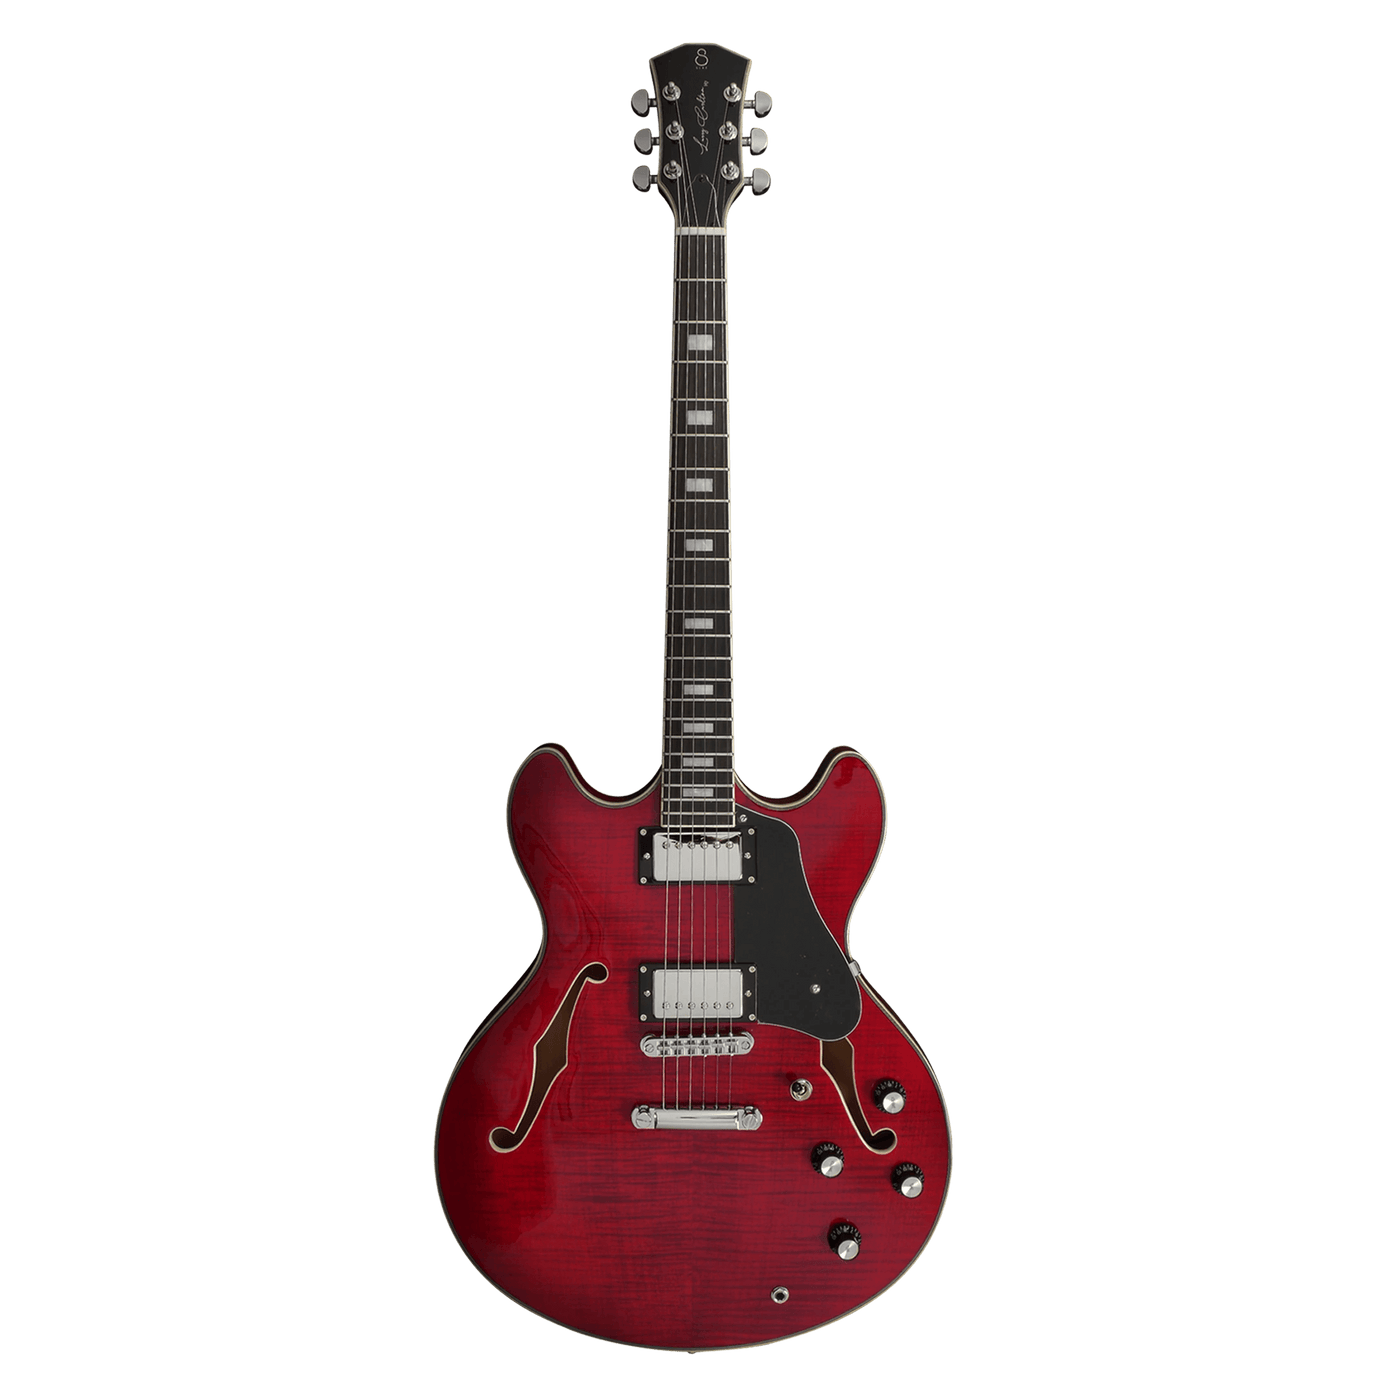 Sire H7 See Through Red - Guitarra Eléctrica